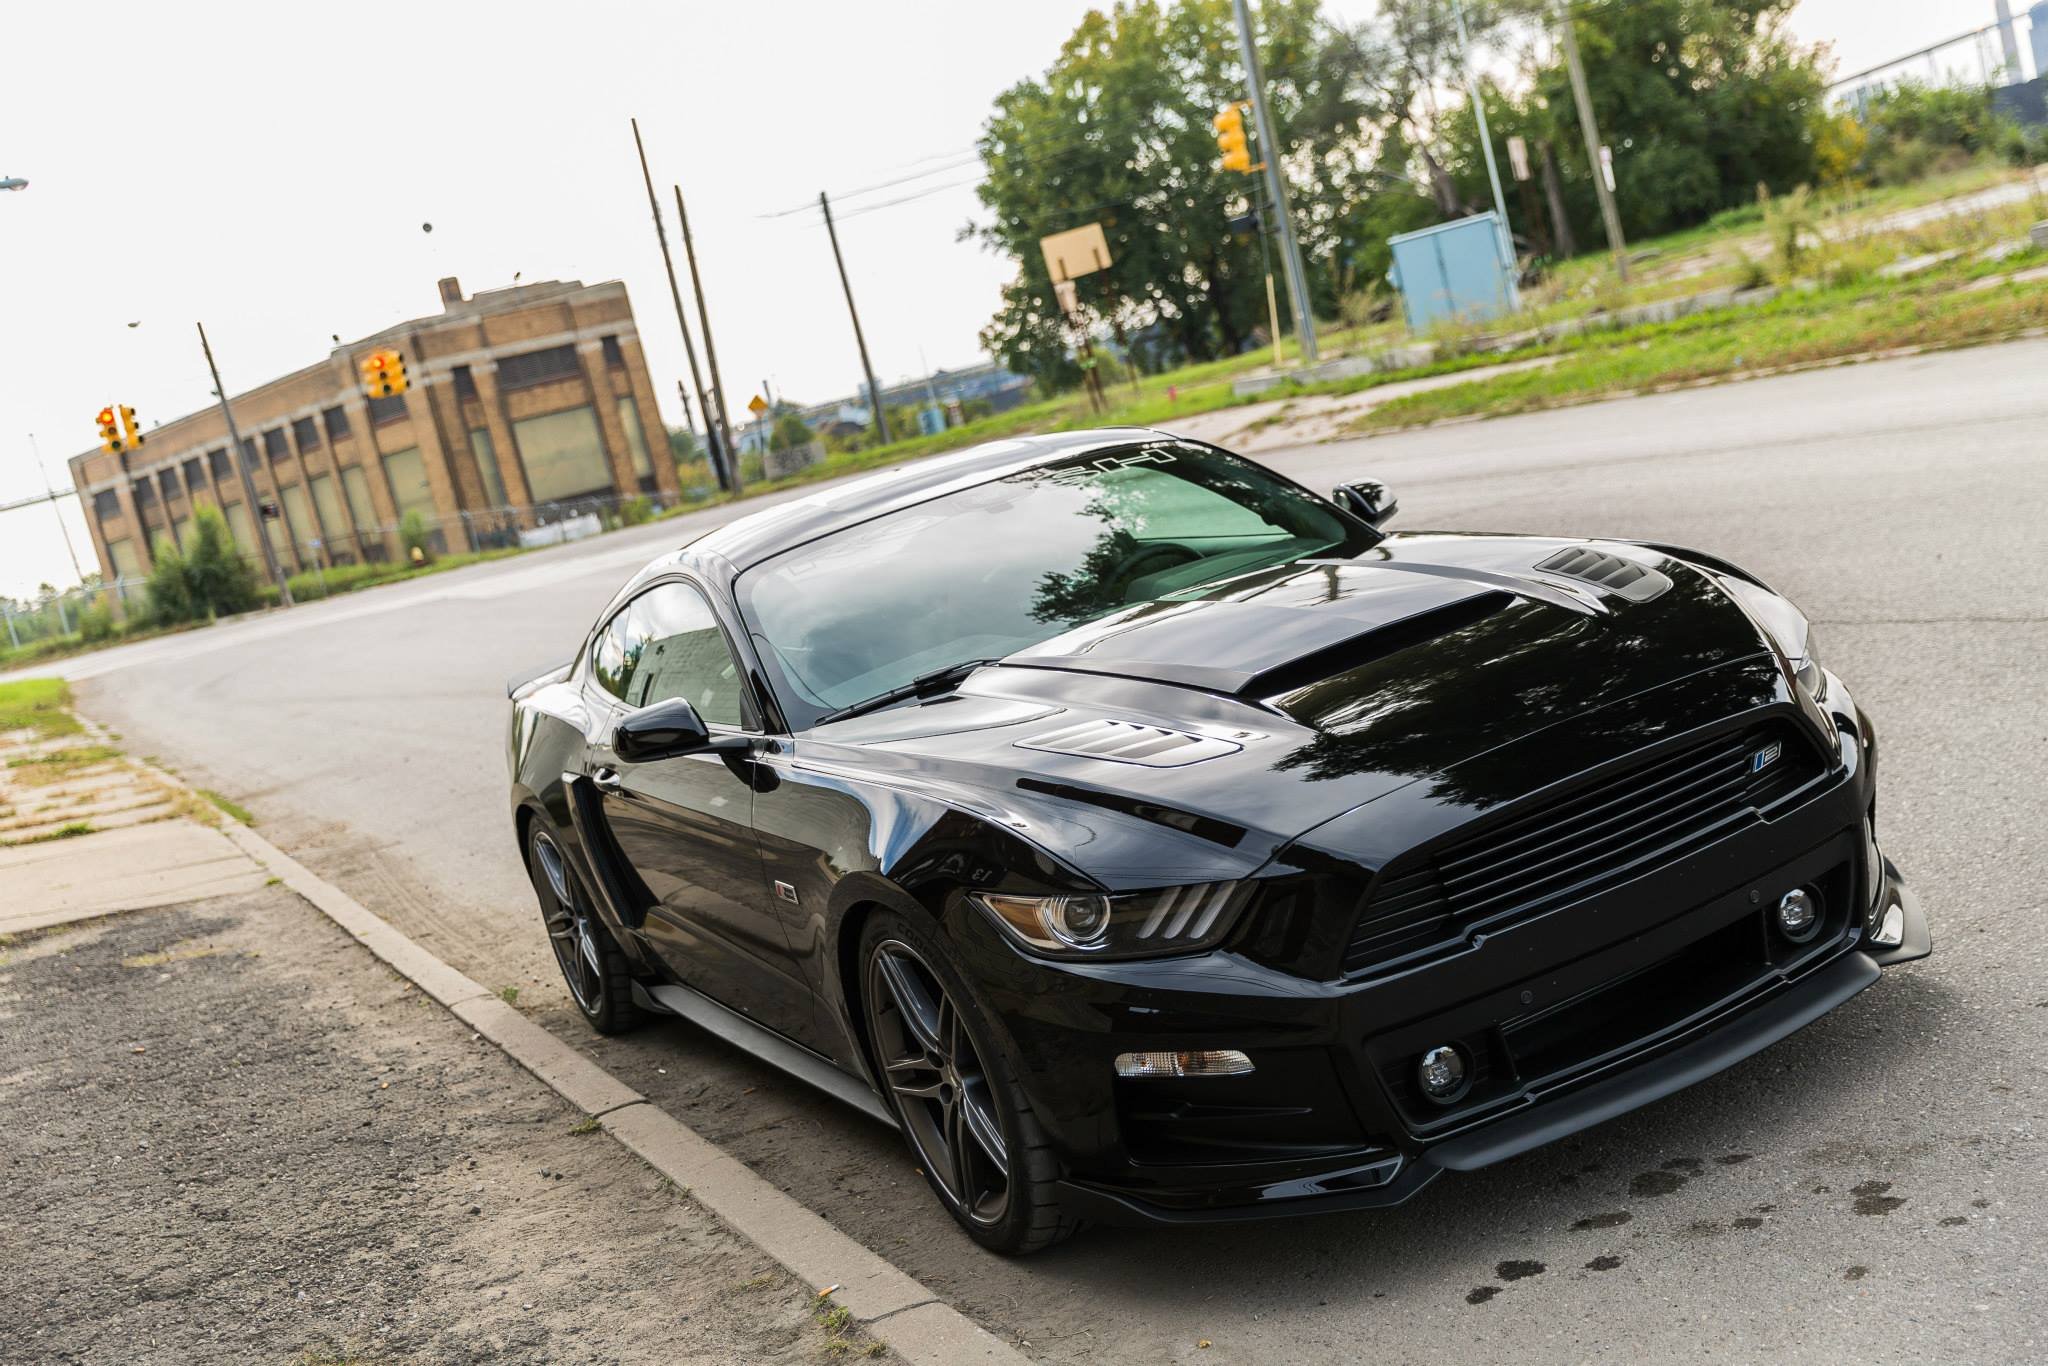 2015, Roush, R s, P550, Ford, Mustang, Muscle Wallpaper